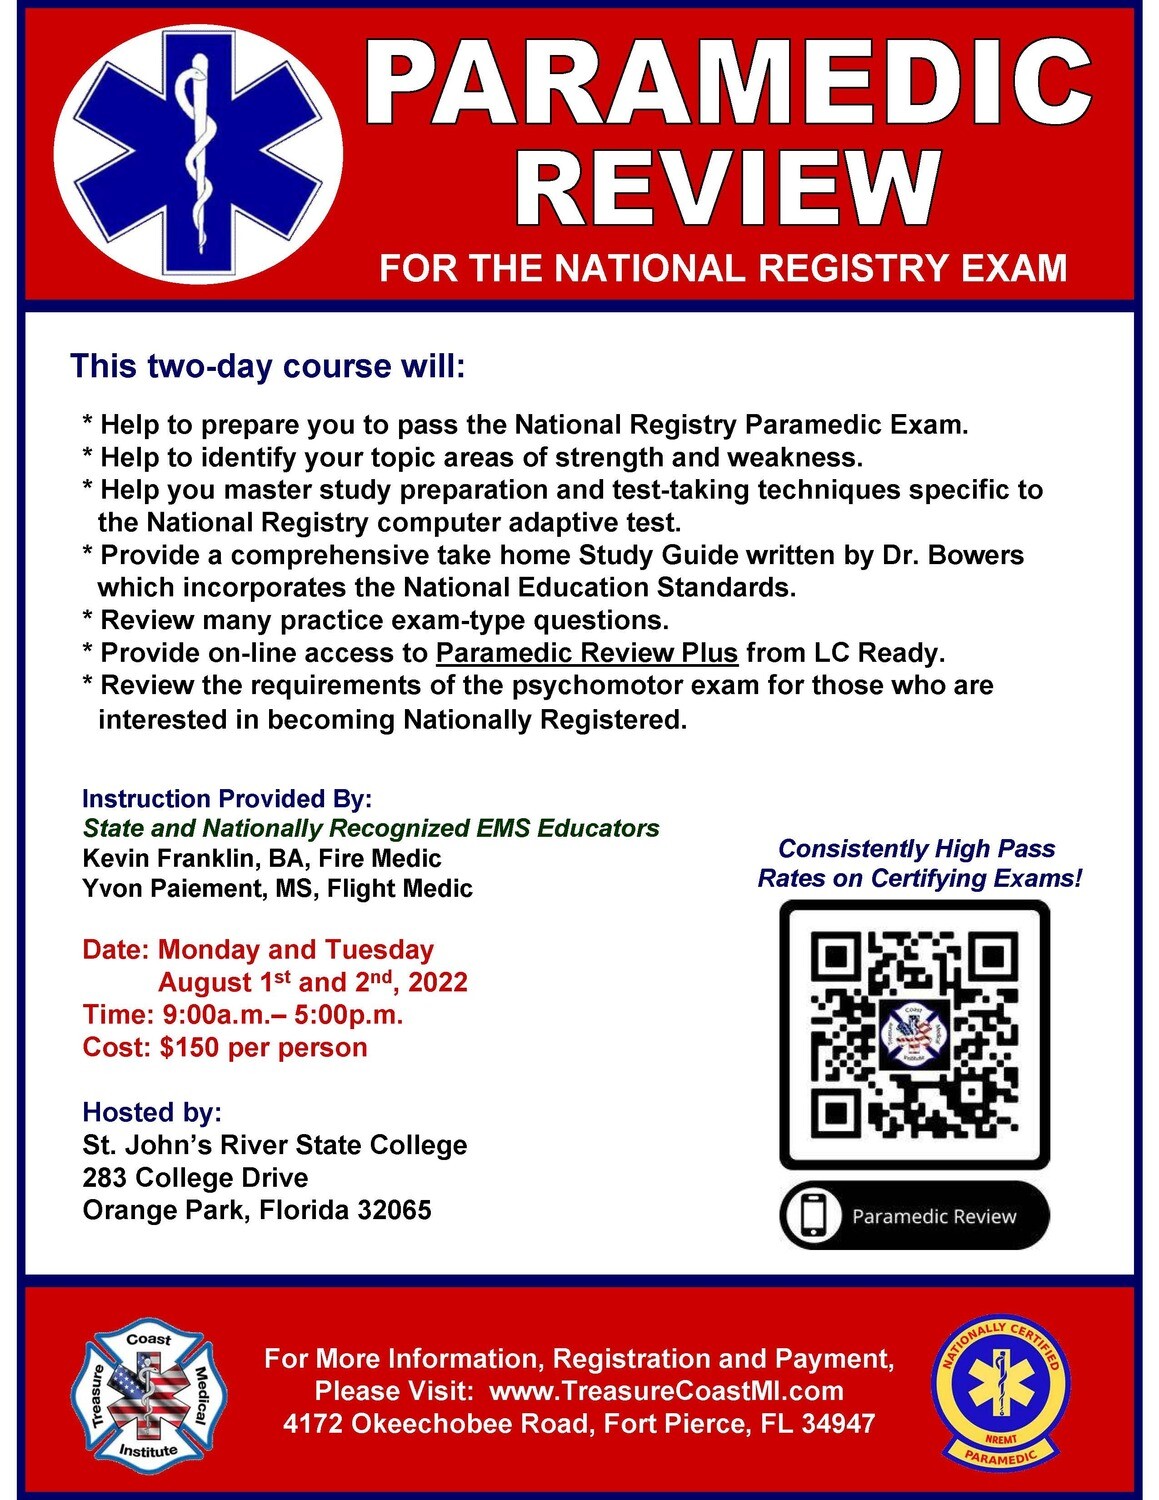 National Registry Paramedic Exam Review August 1st and 2nd Orange Park